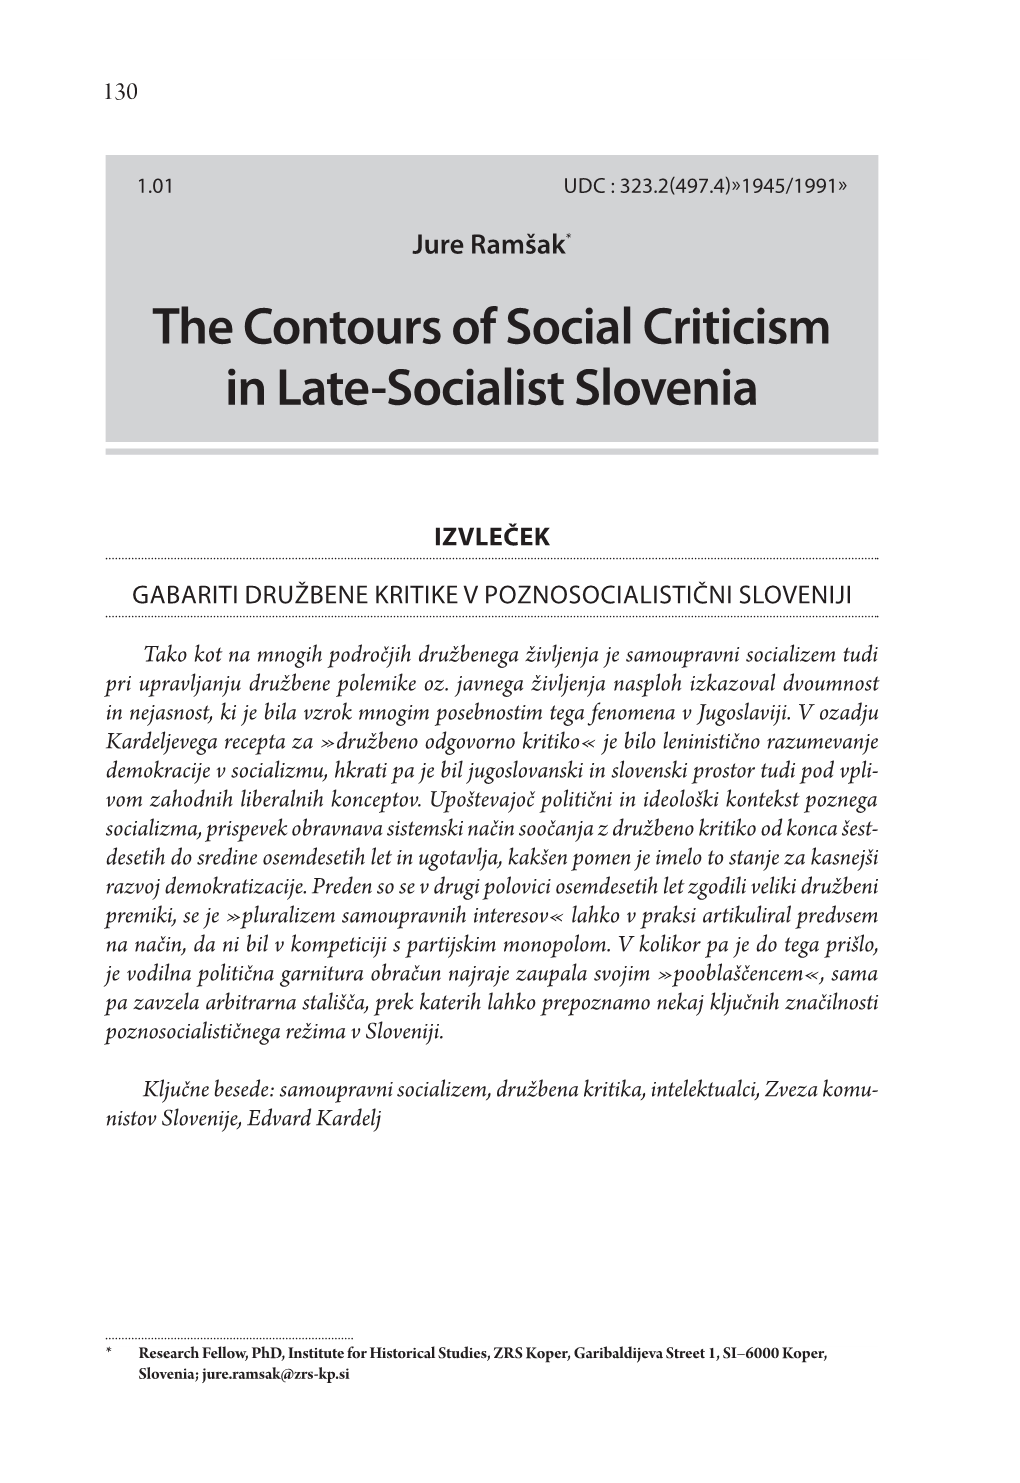 The Contours of Social Criticism in Late-Socialist Slovenia